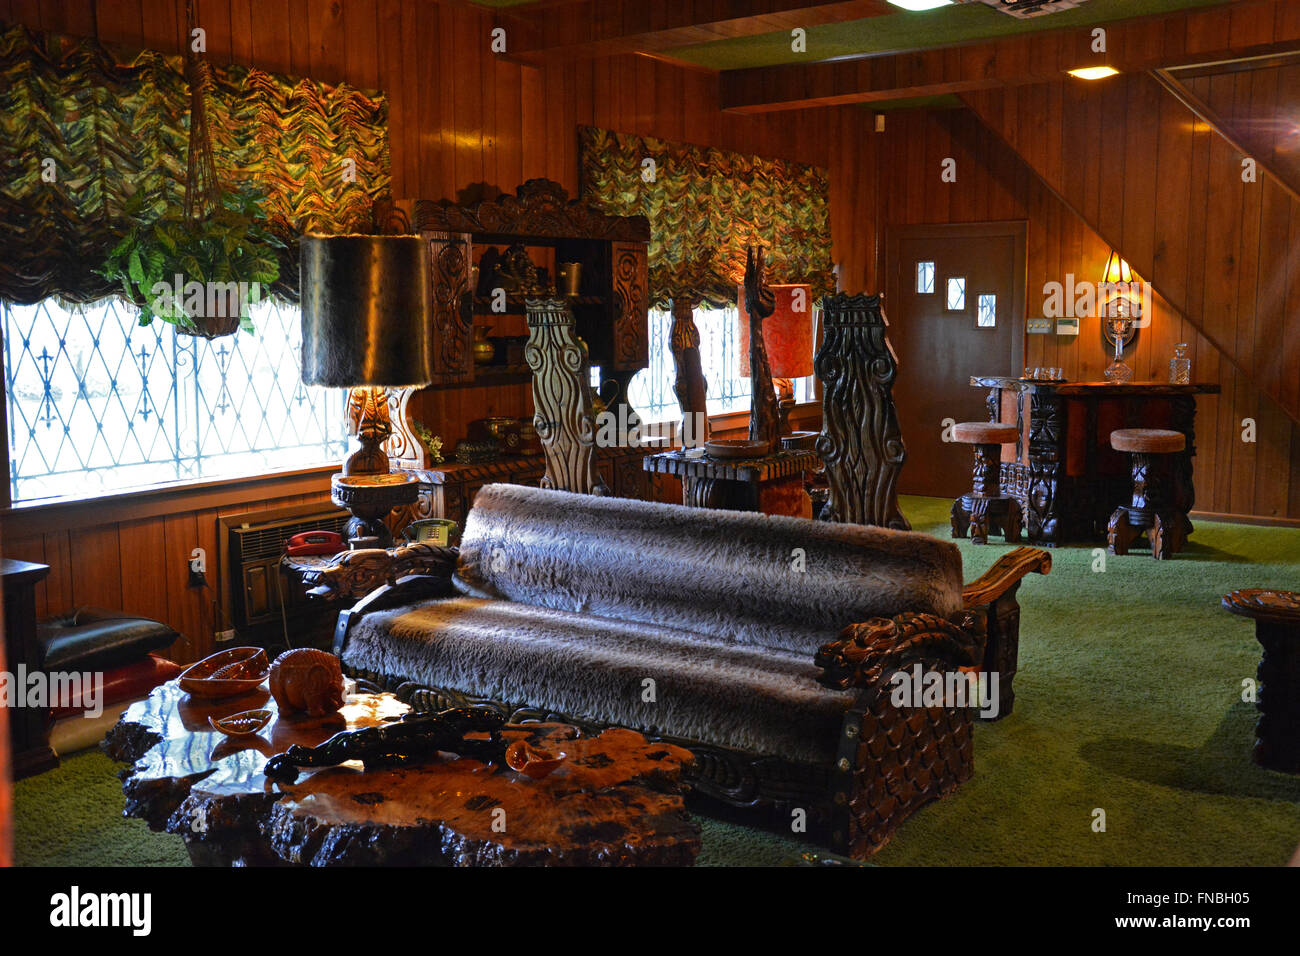 The jungle room at Graceland, Elvis Presley's home and now a museum in Memphis Tennessee. Stock Photo